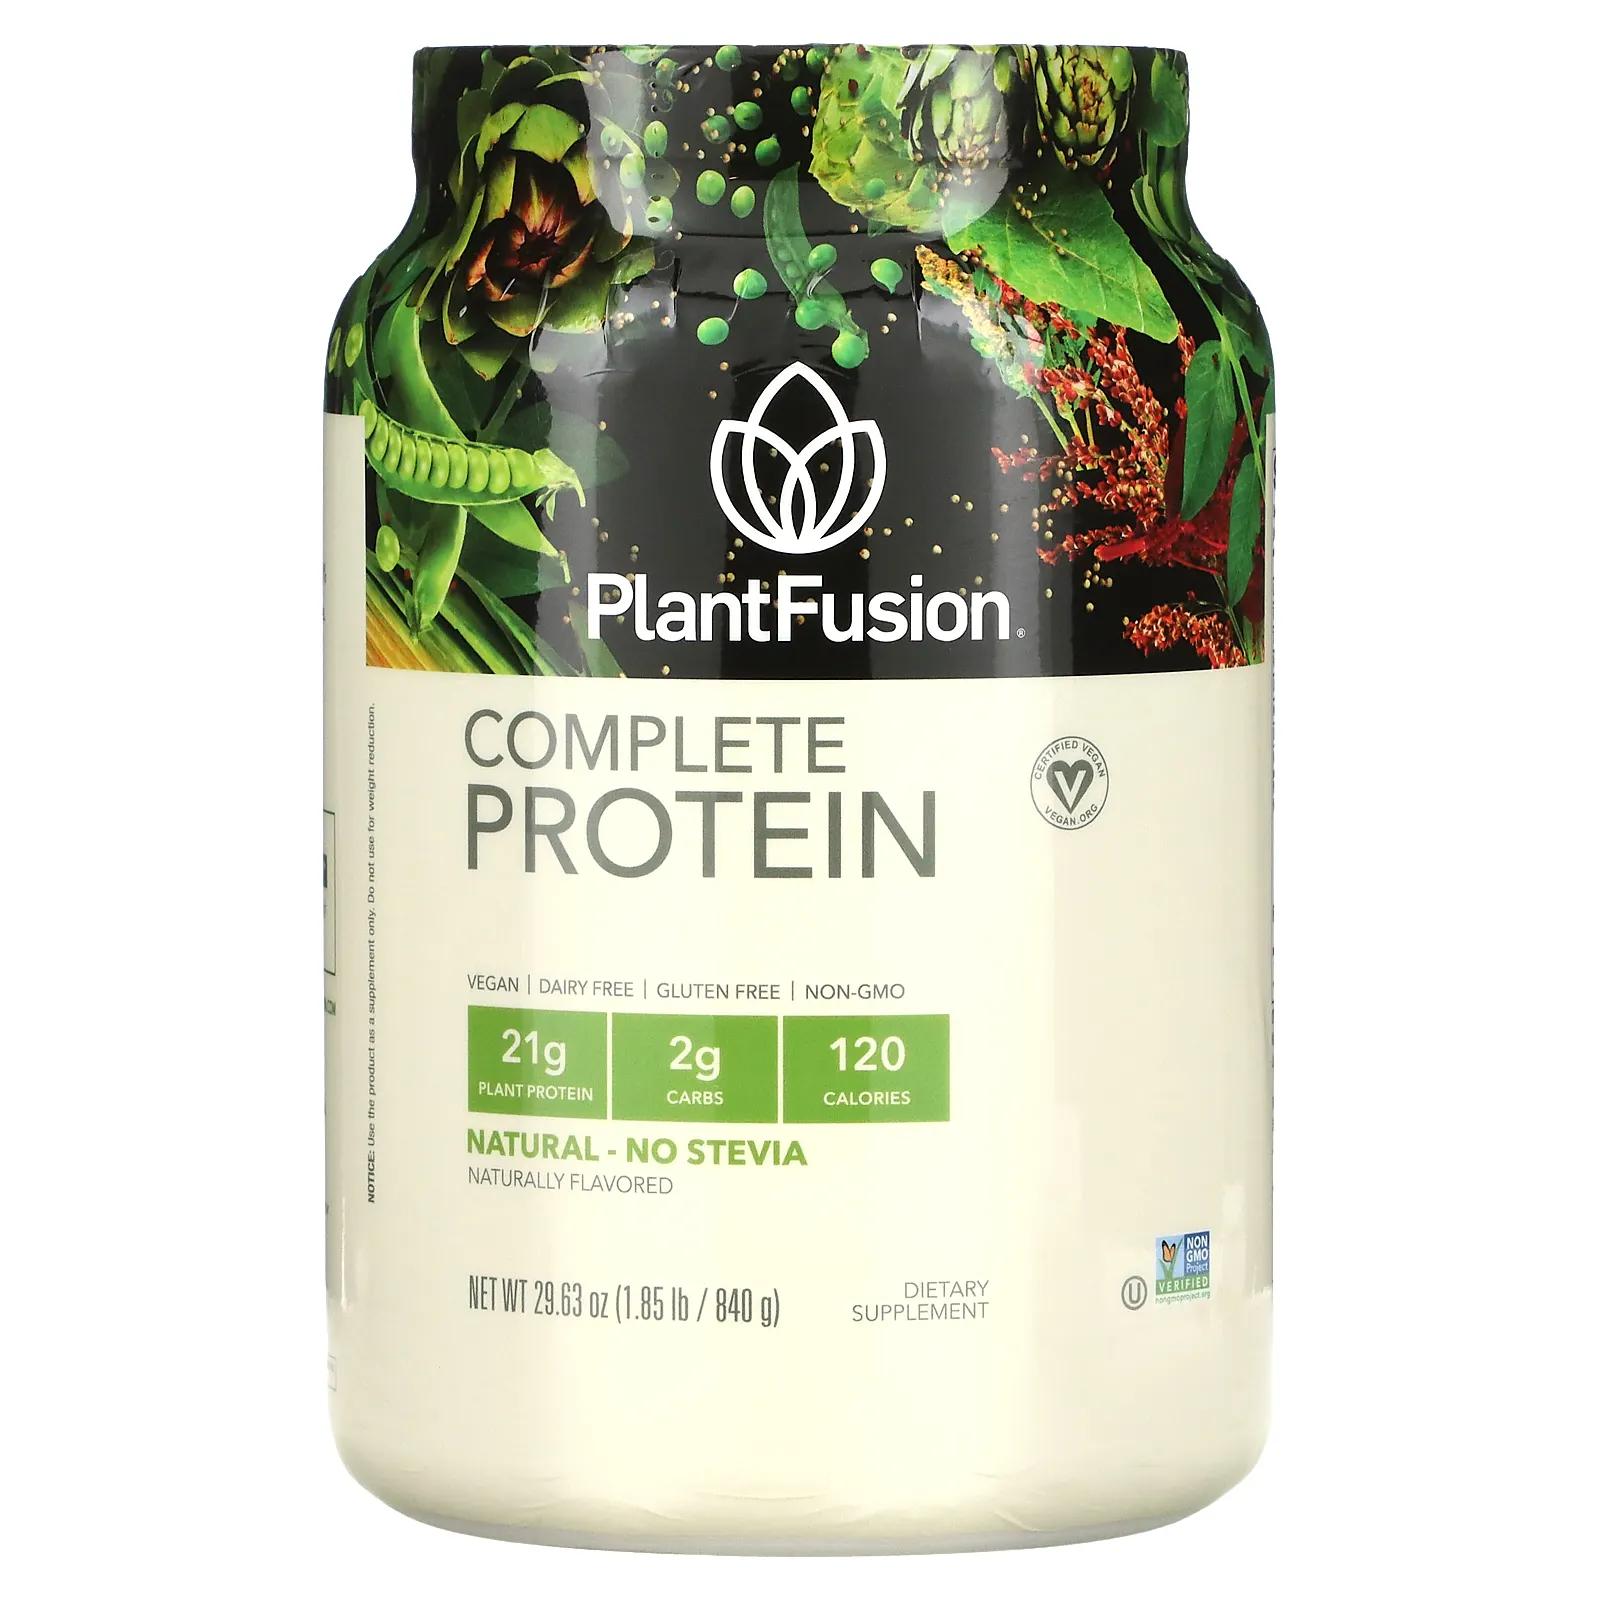 PlantFusion Complete Plant Protein натуральный 2 фунта (908 г) plantfusion complete protein натуральный вкус 840г